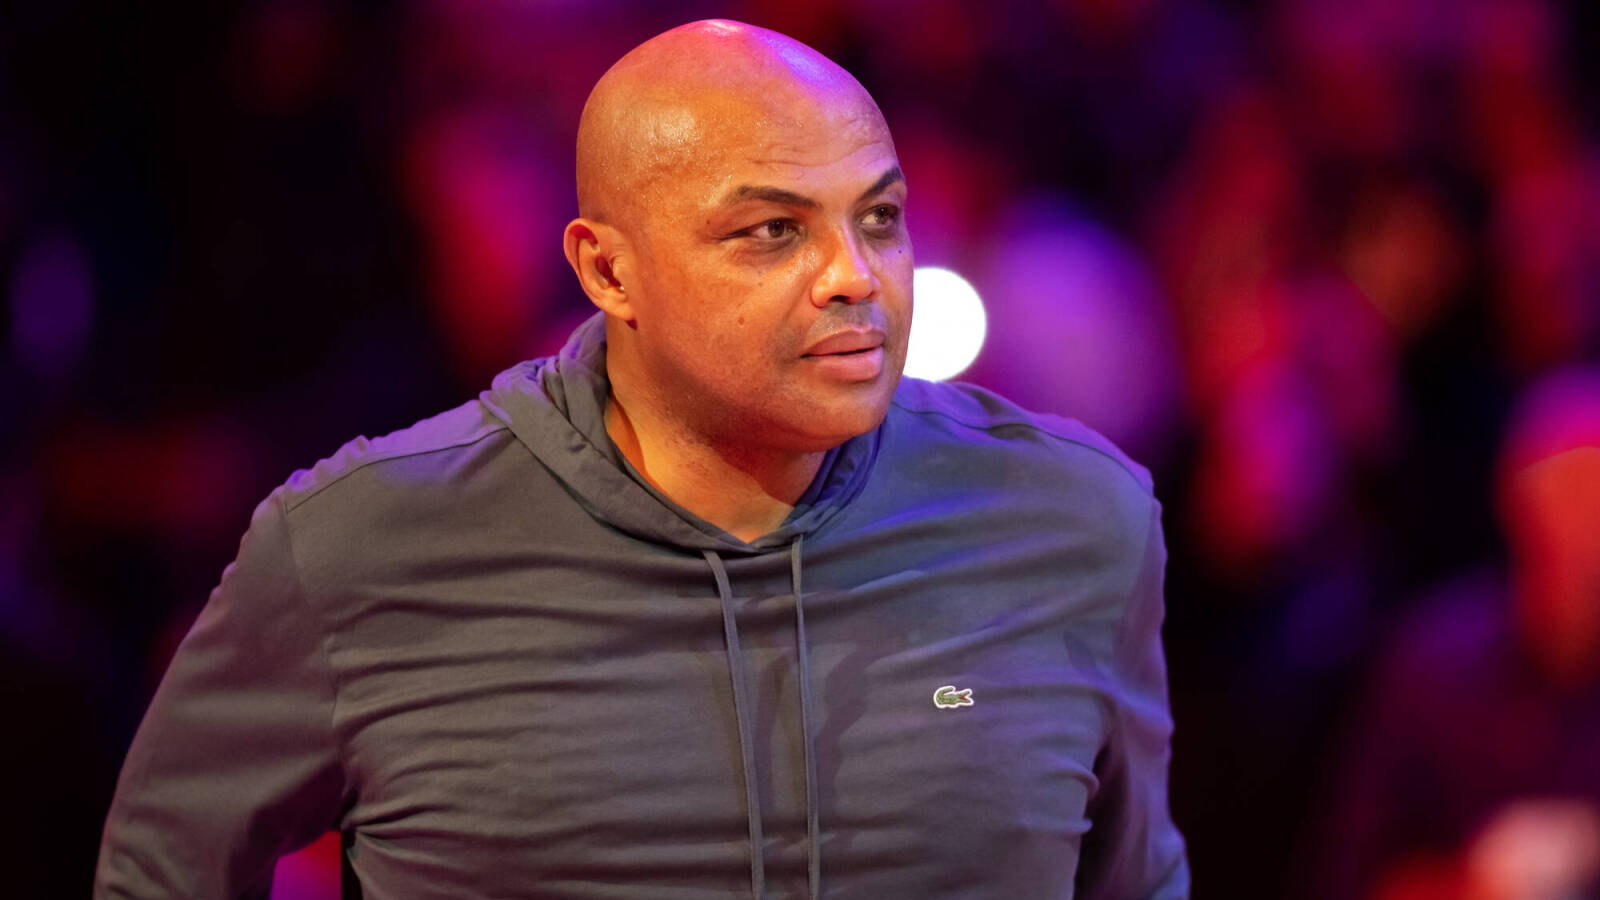 Charles Barkley speaks on his next move should TNT lose NBA media rights